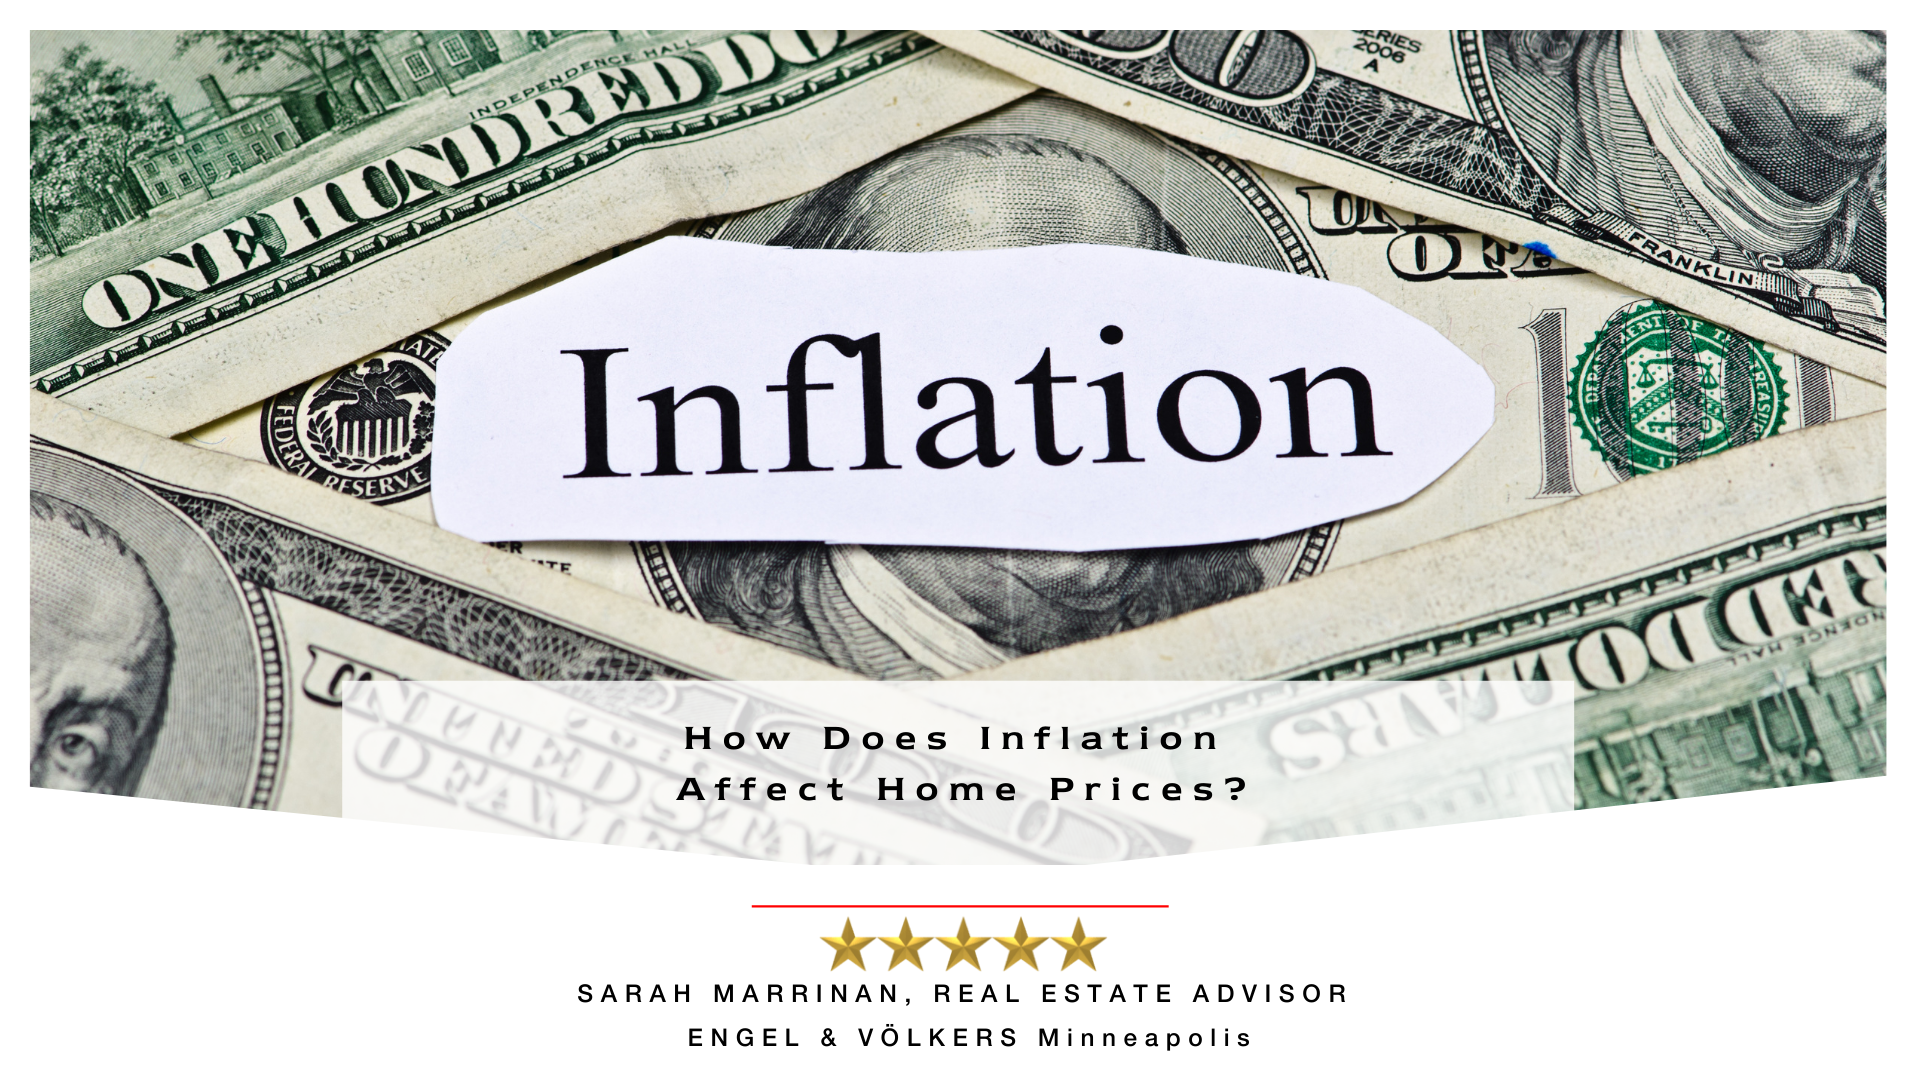 How Does Inflation Affect Home Prices?